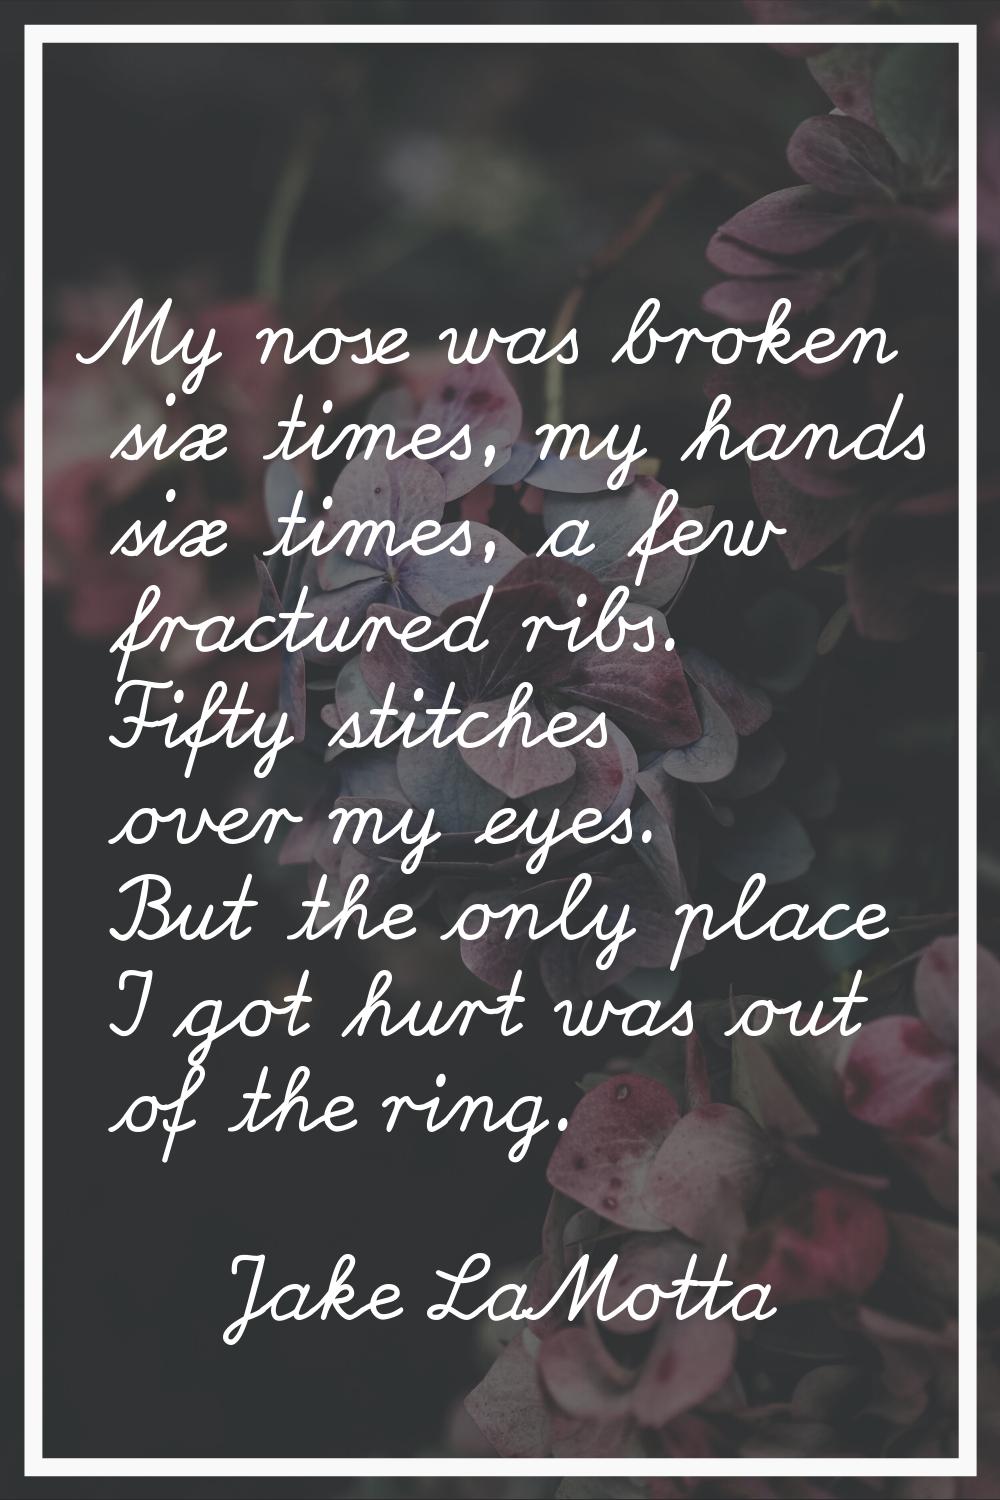 My nose was broken six times, my hands six times, a few fractured ribs. Fifty stitches over my eyes